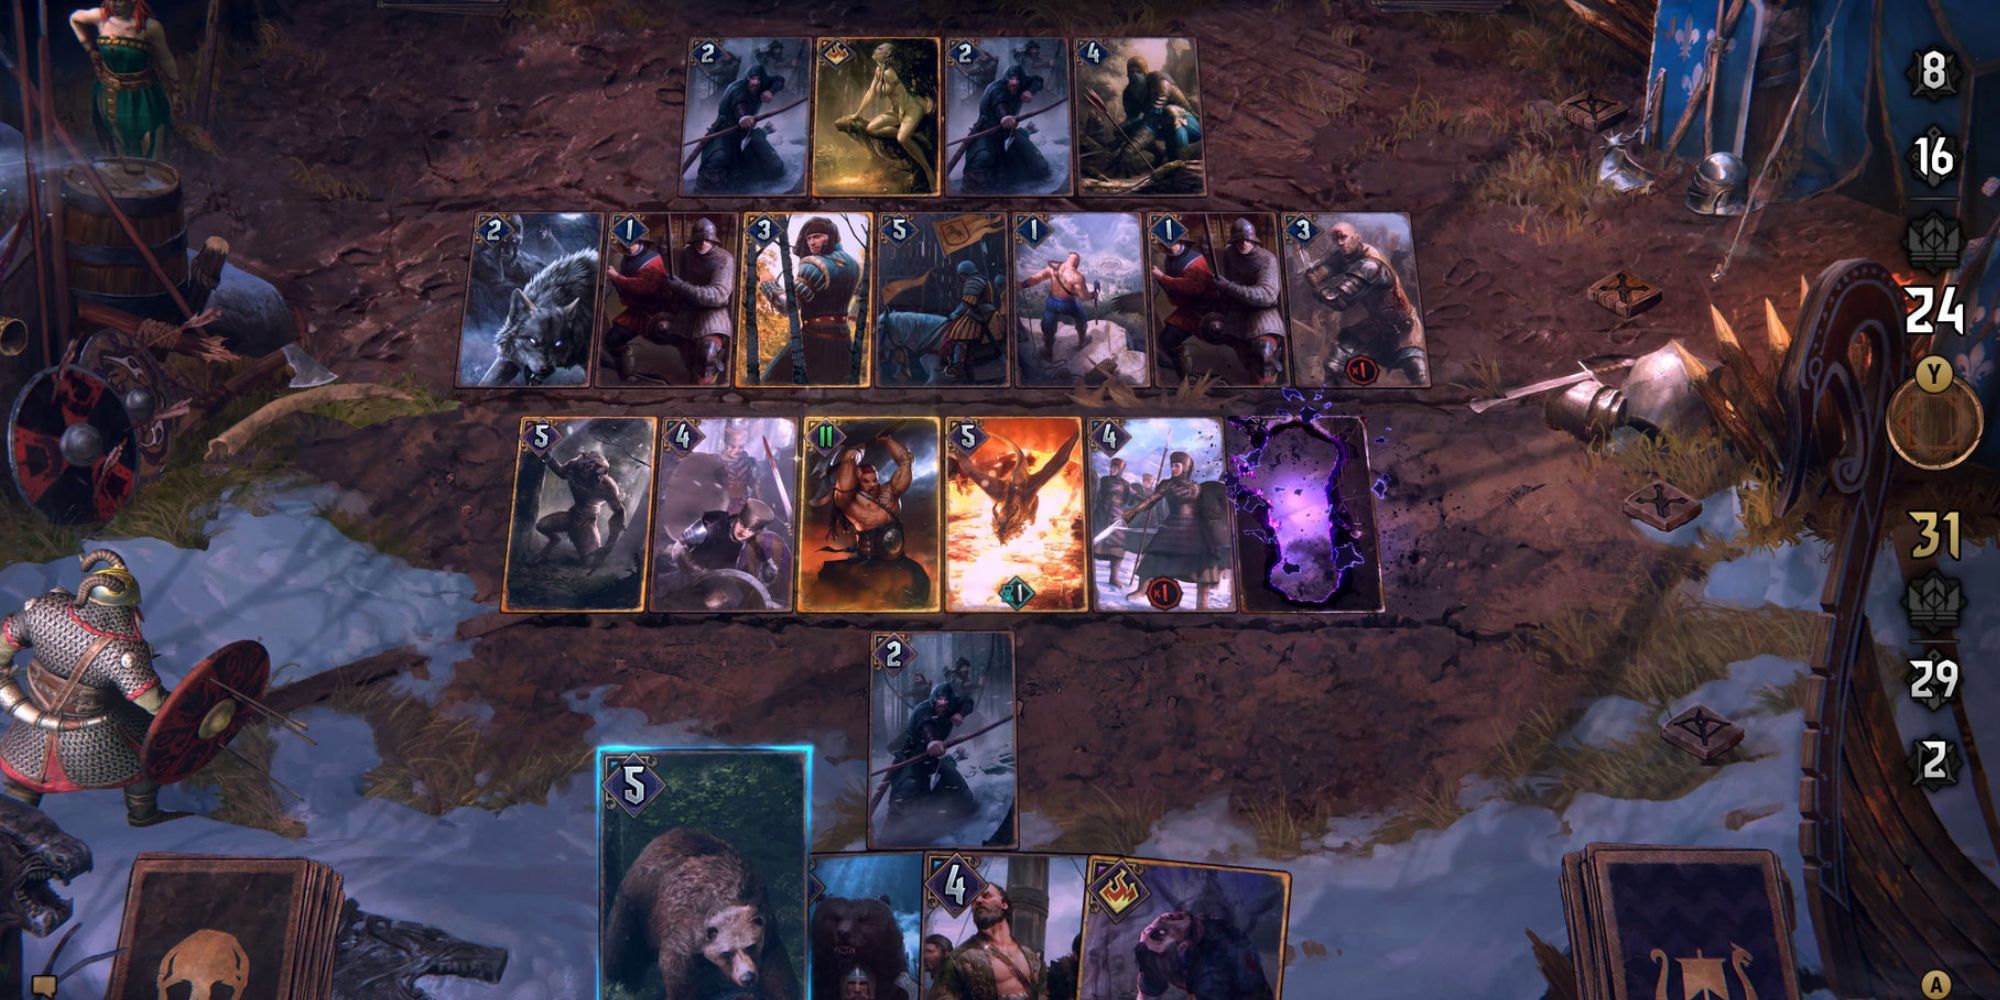 Hovering over an Elder Bear card with a base power of 5, with the playing field already populated by 12 enemy cards and 7 player cards